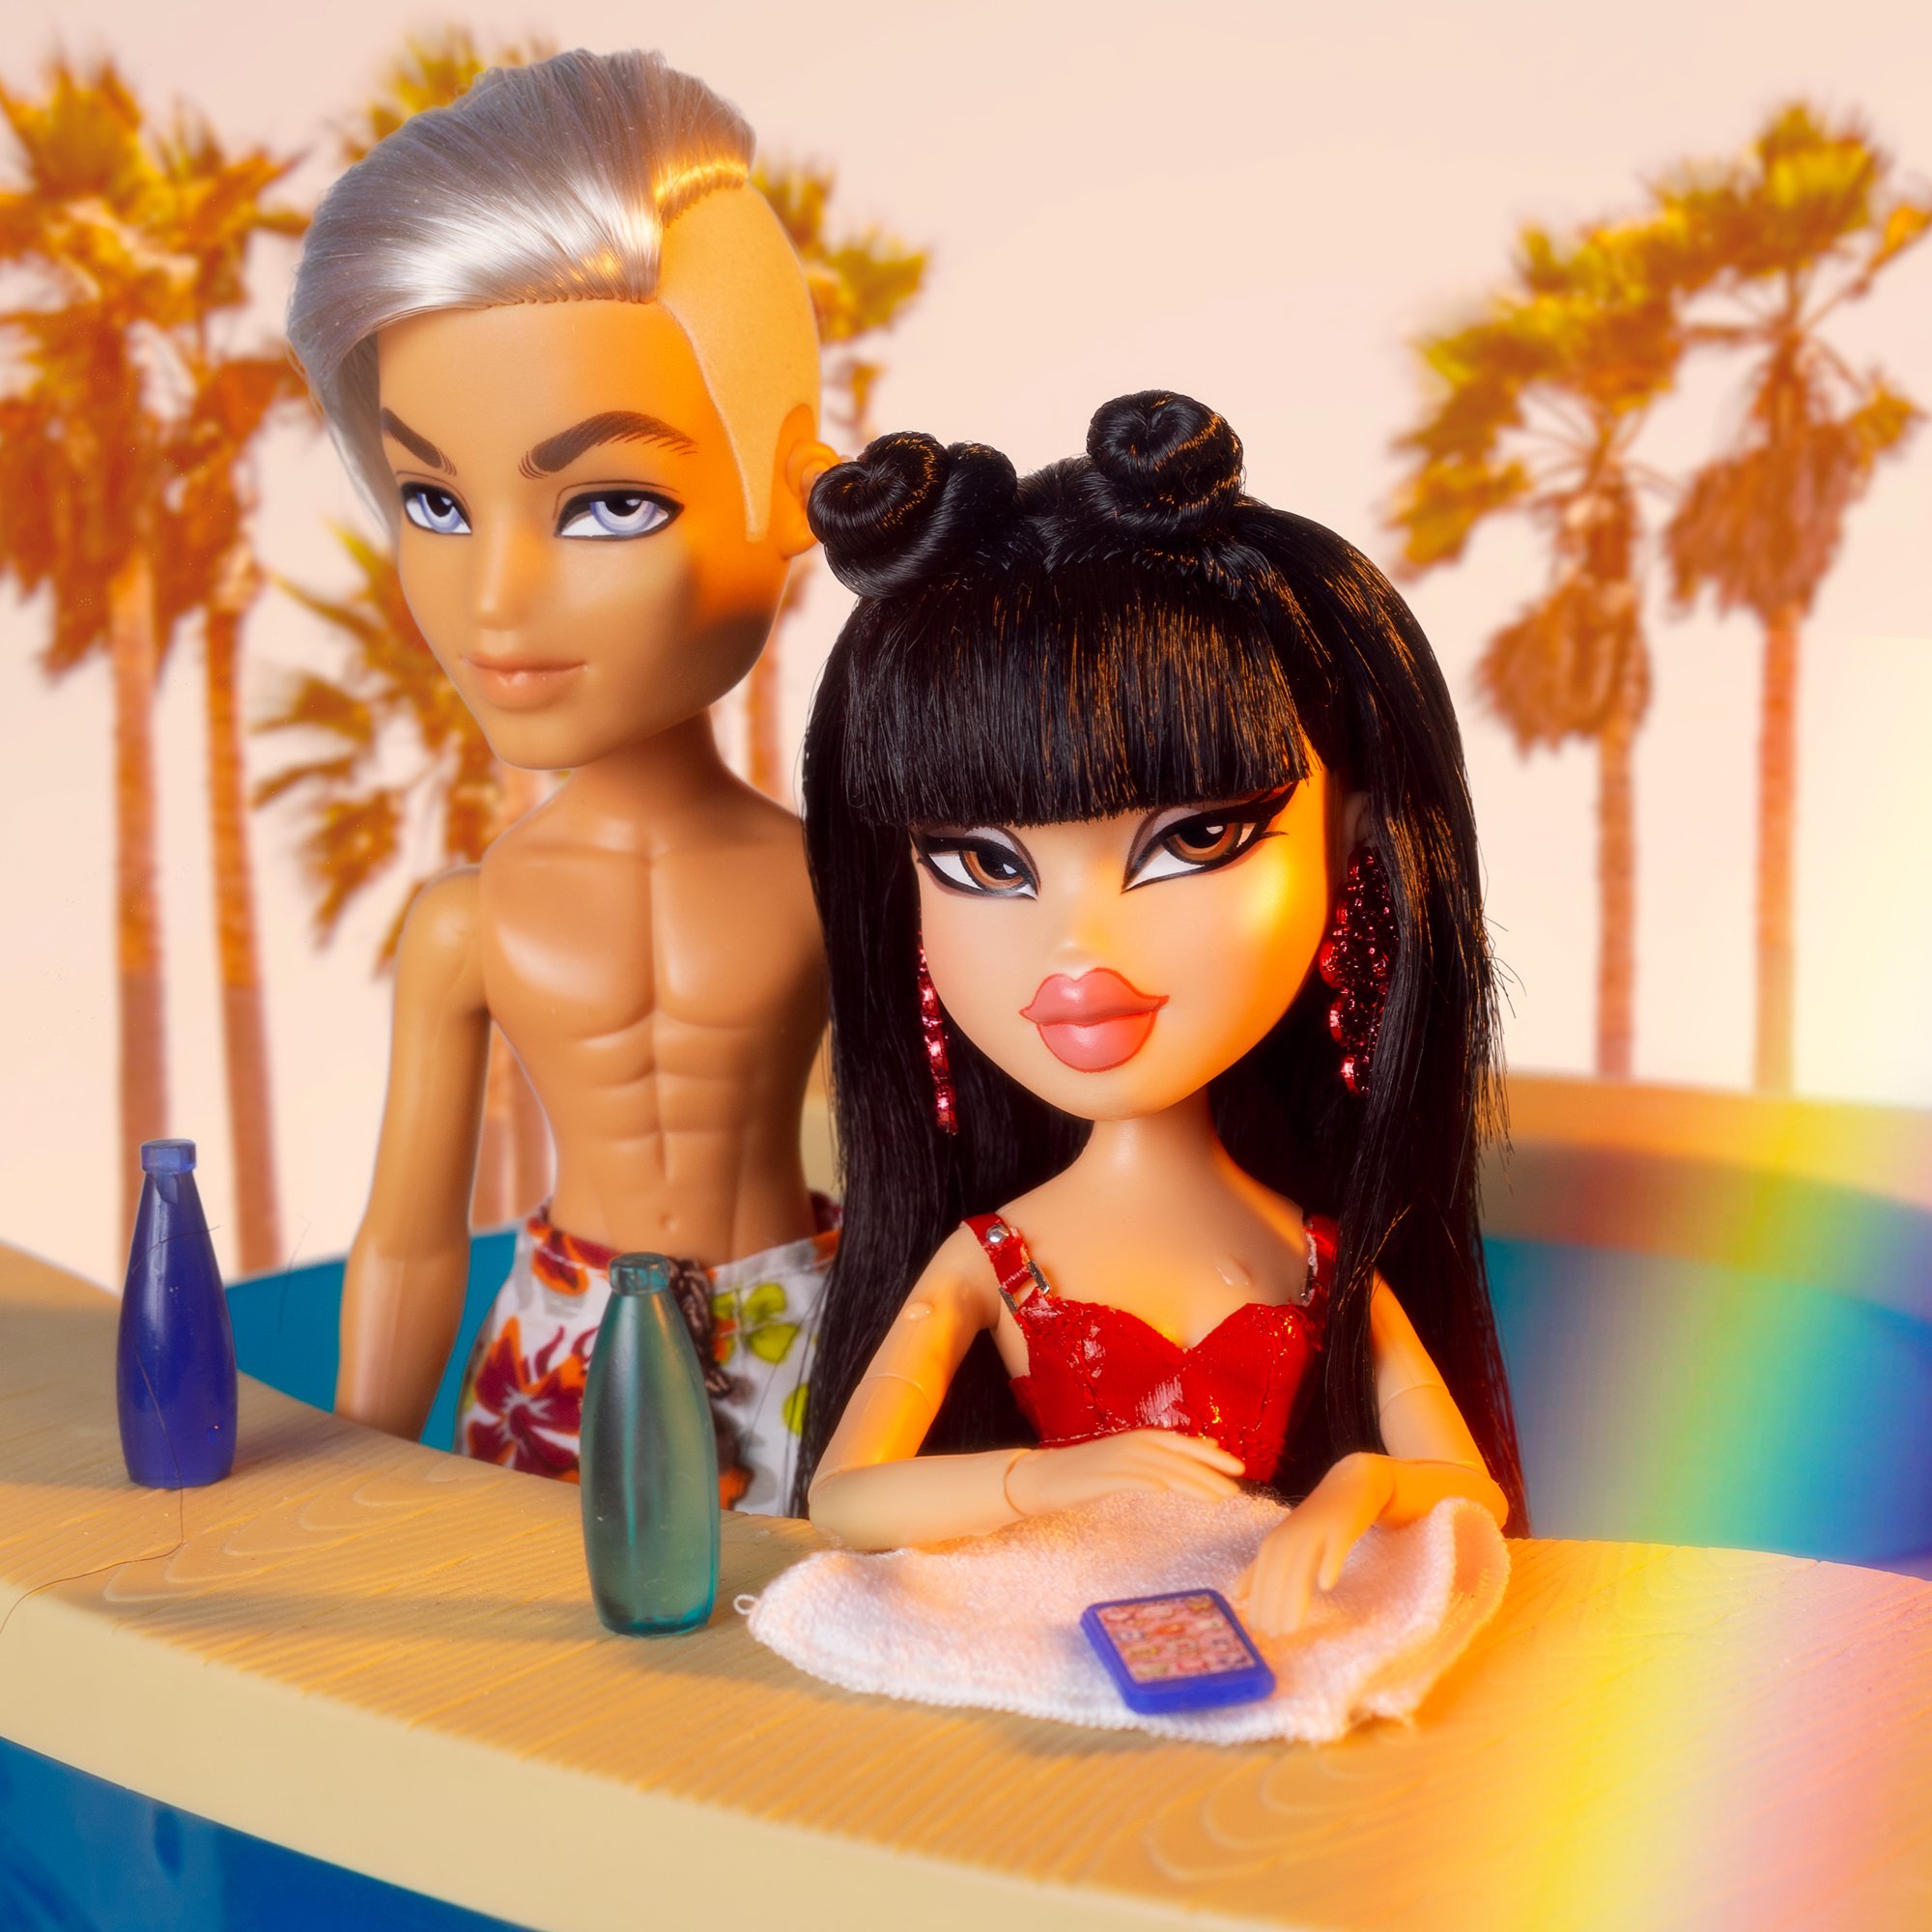 Bratz on X: Dreaming about hot summer dayz spent at the pool